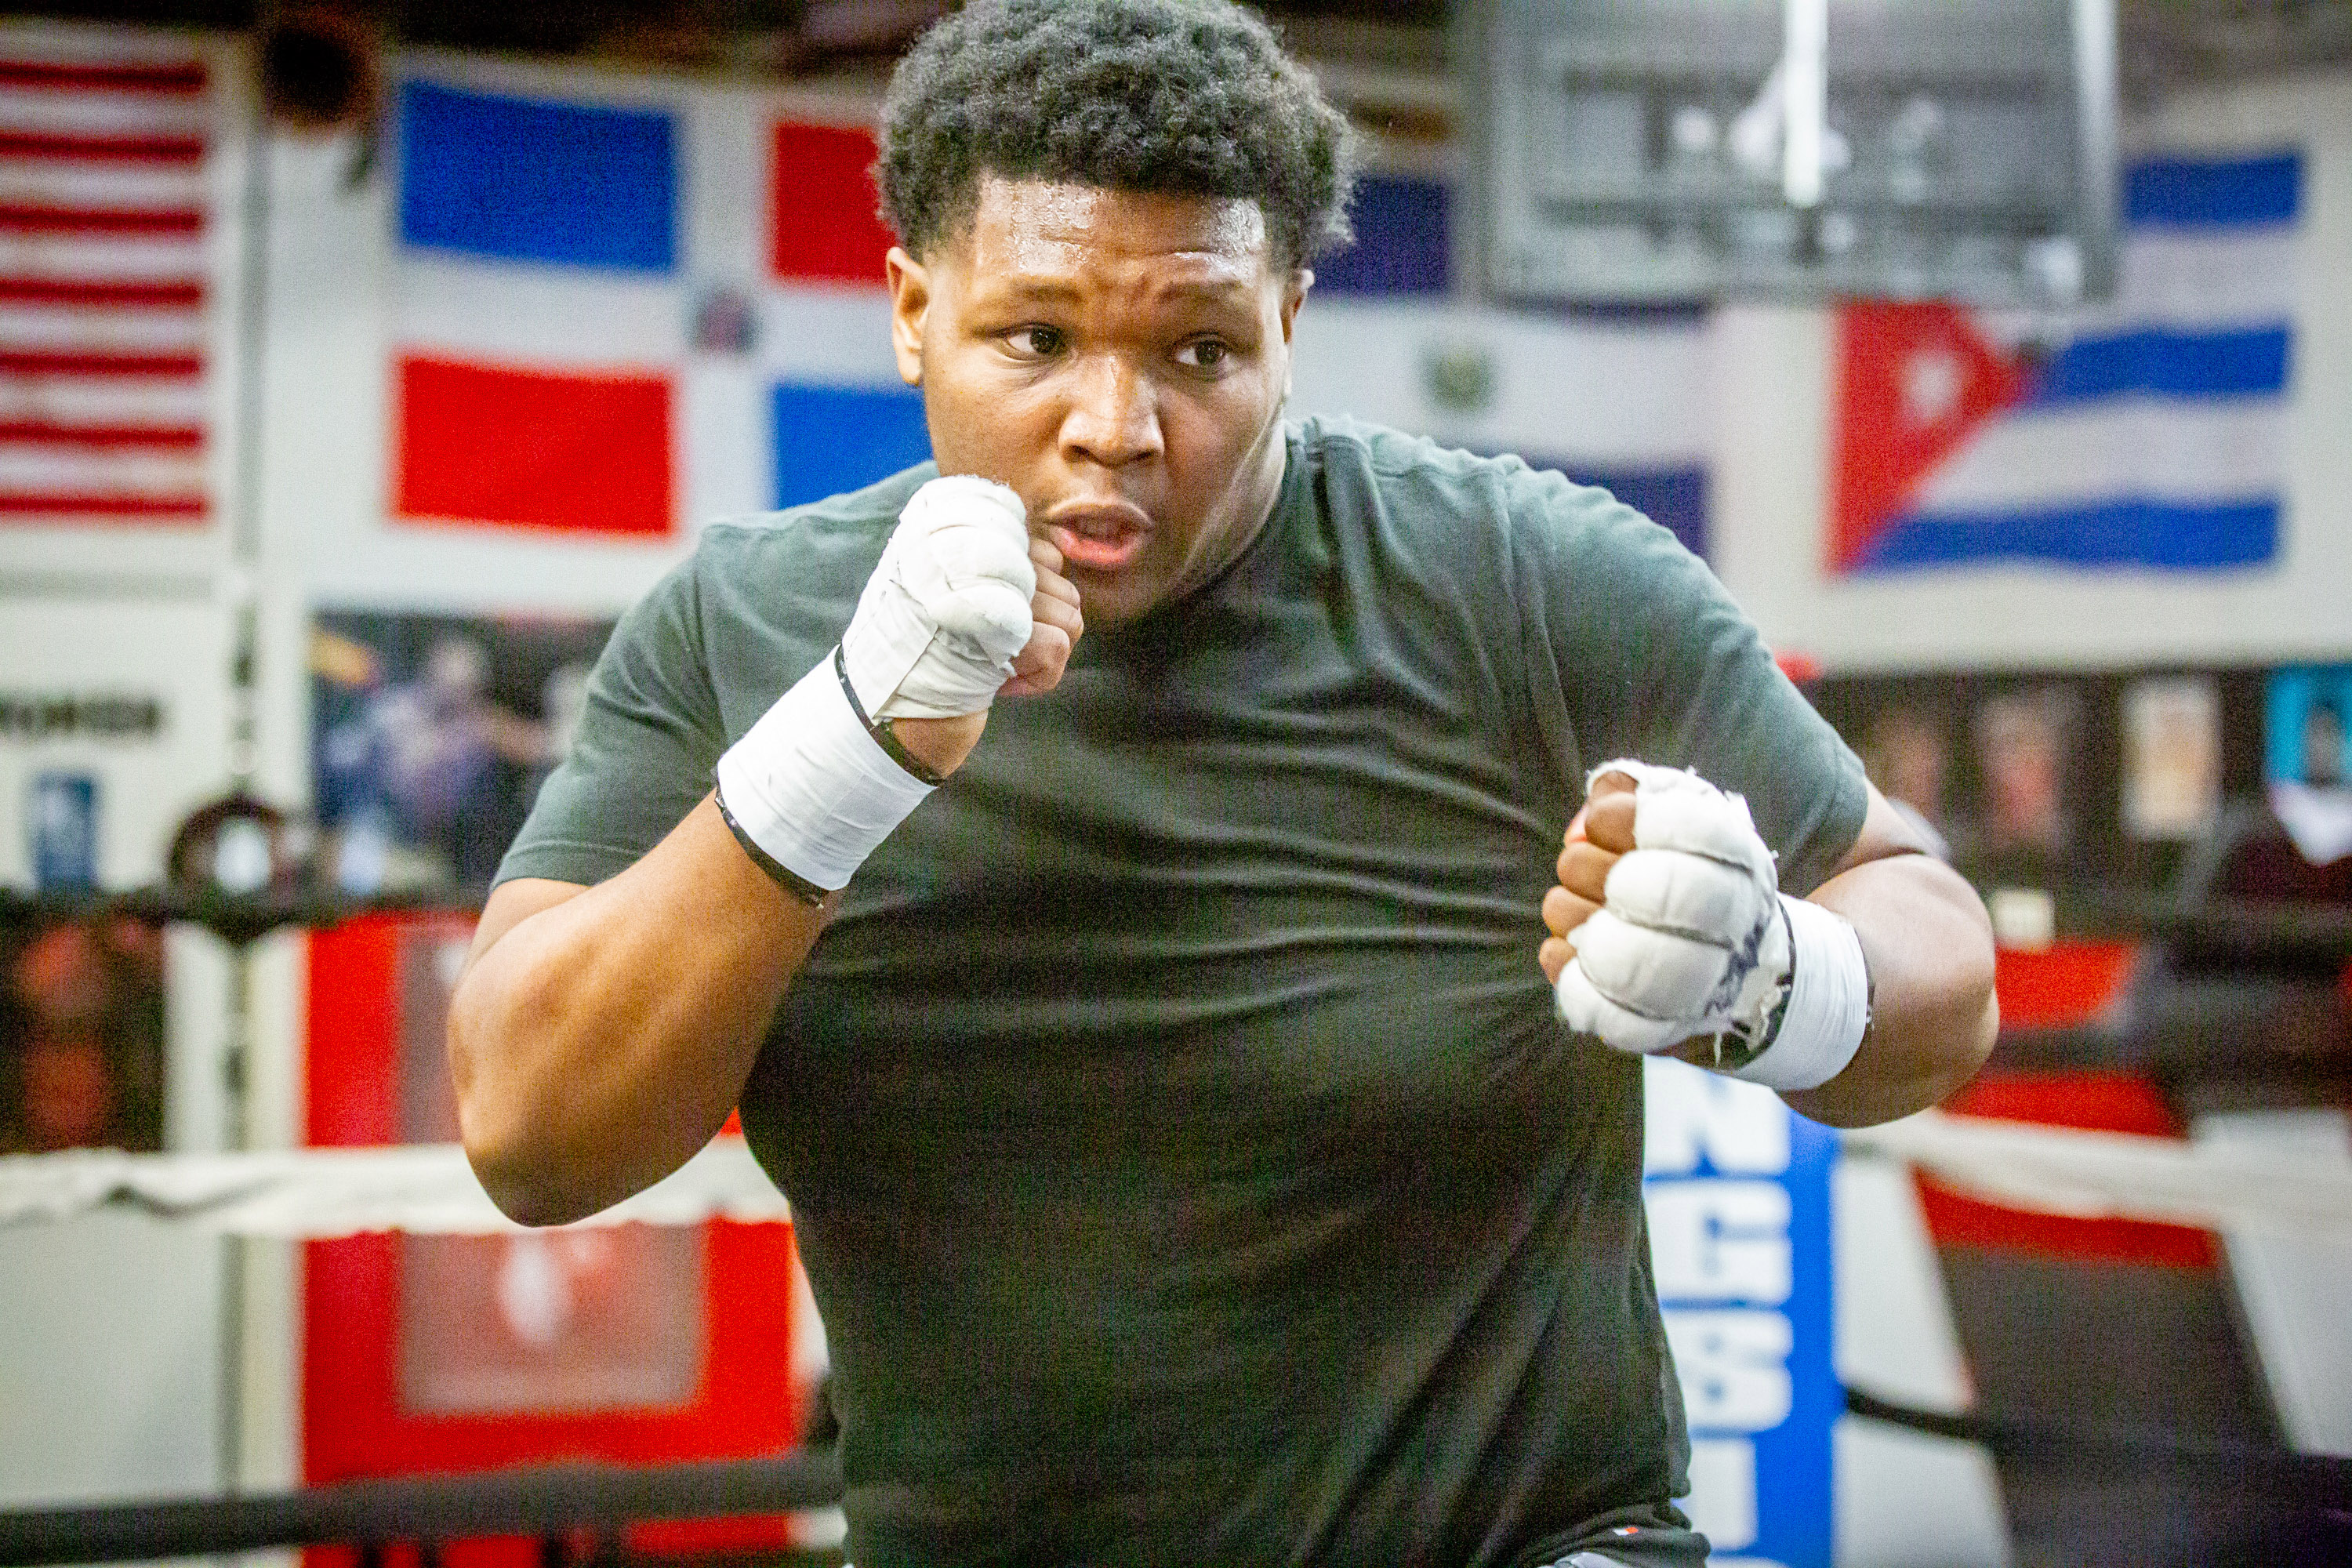 Decatur boxer Mactruck Scott aims to prove hes more than a puncher